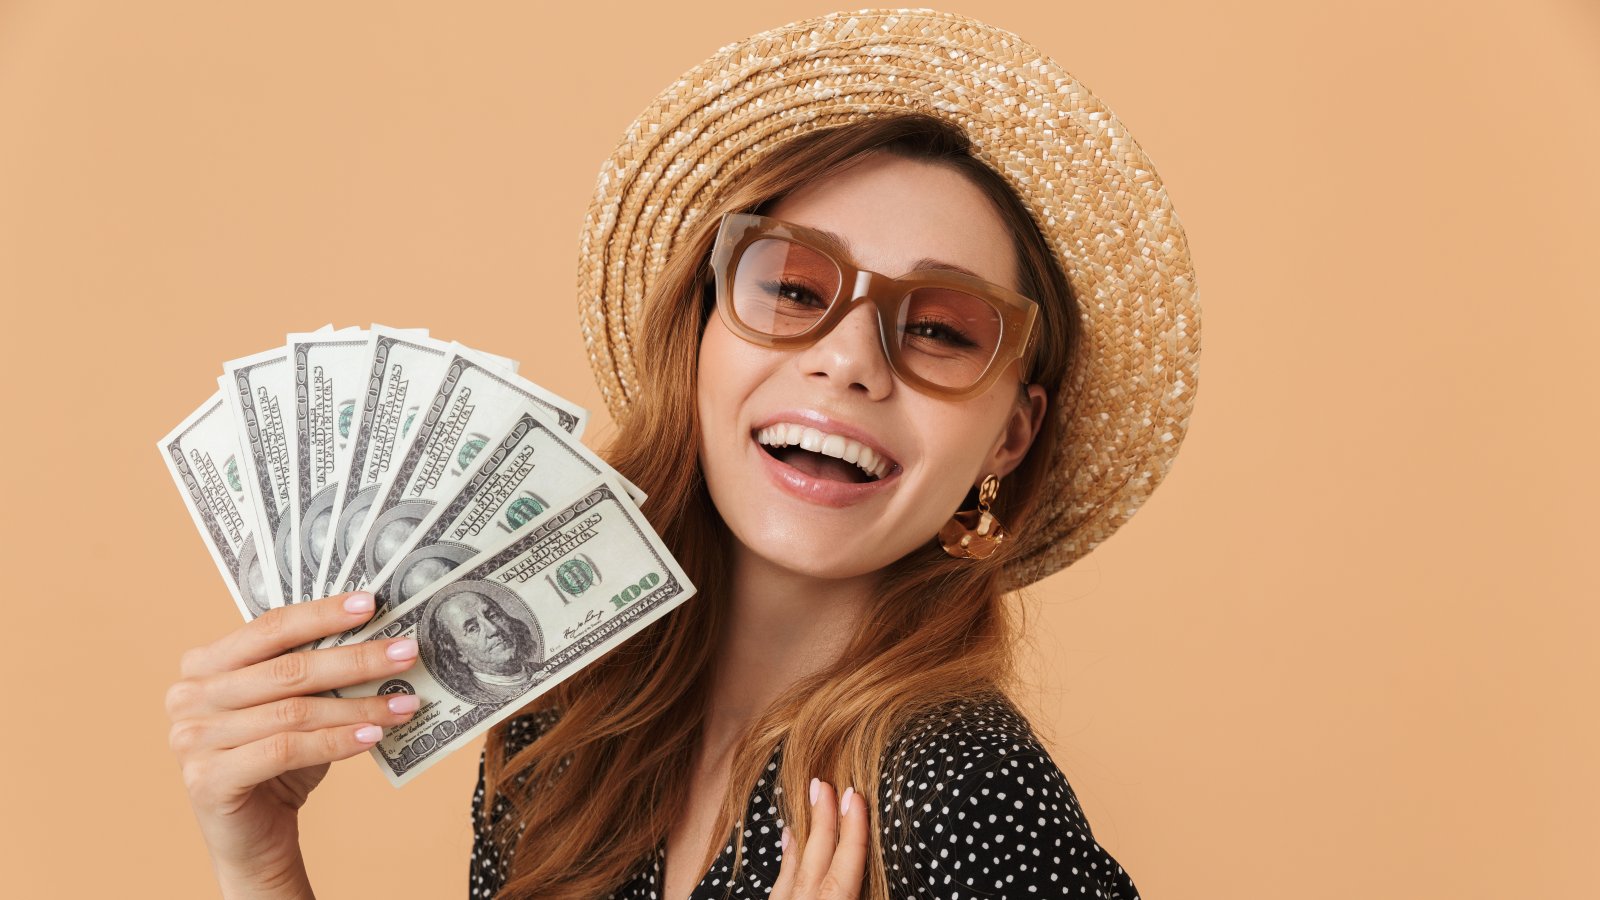 Woman holding money smiling